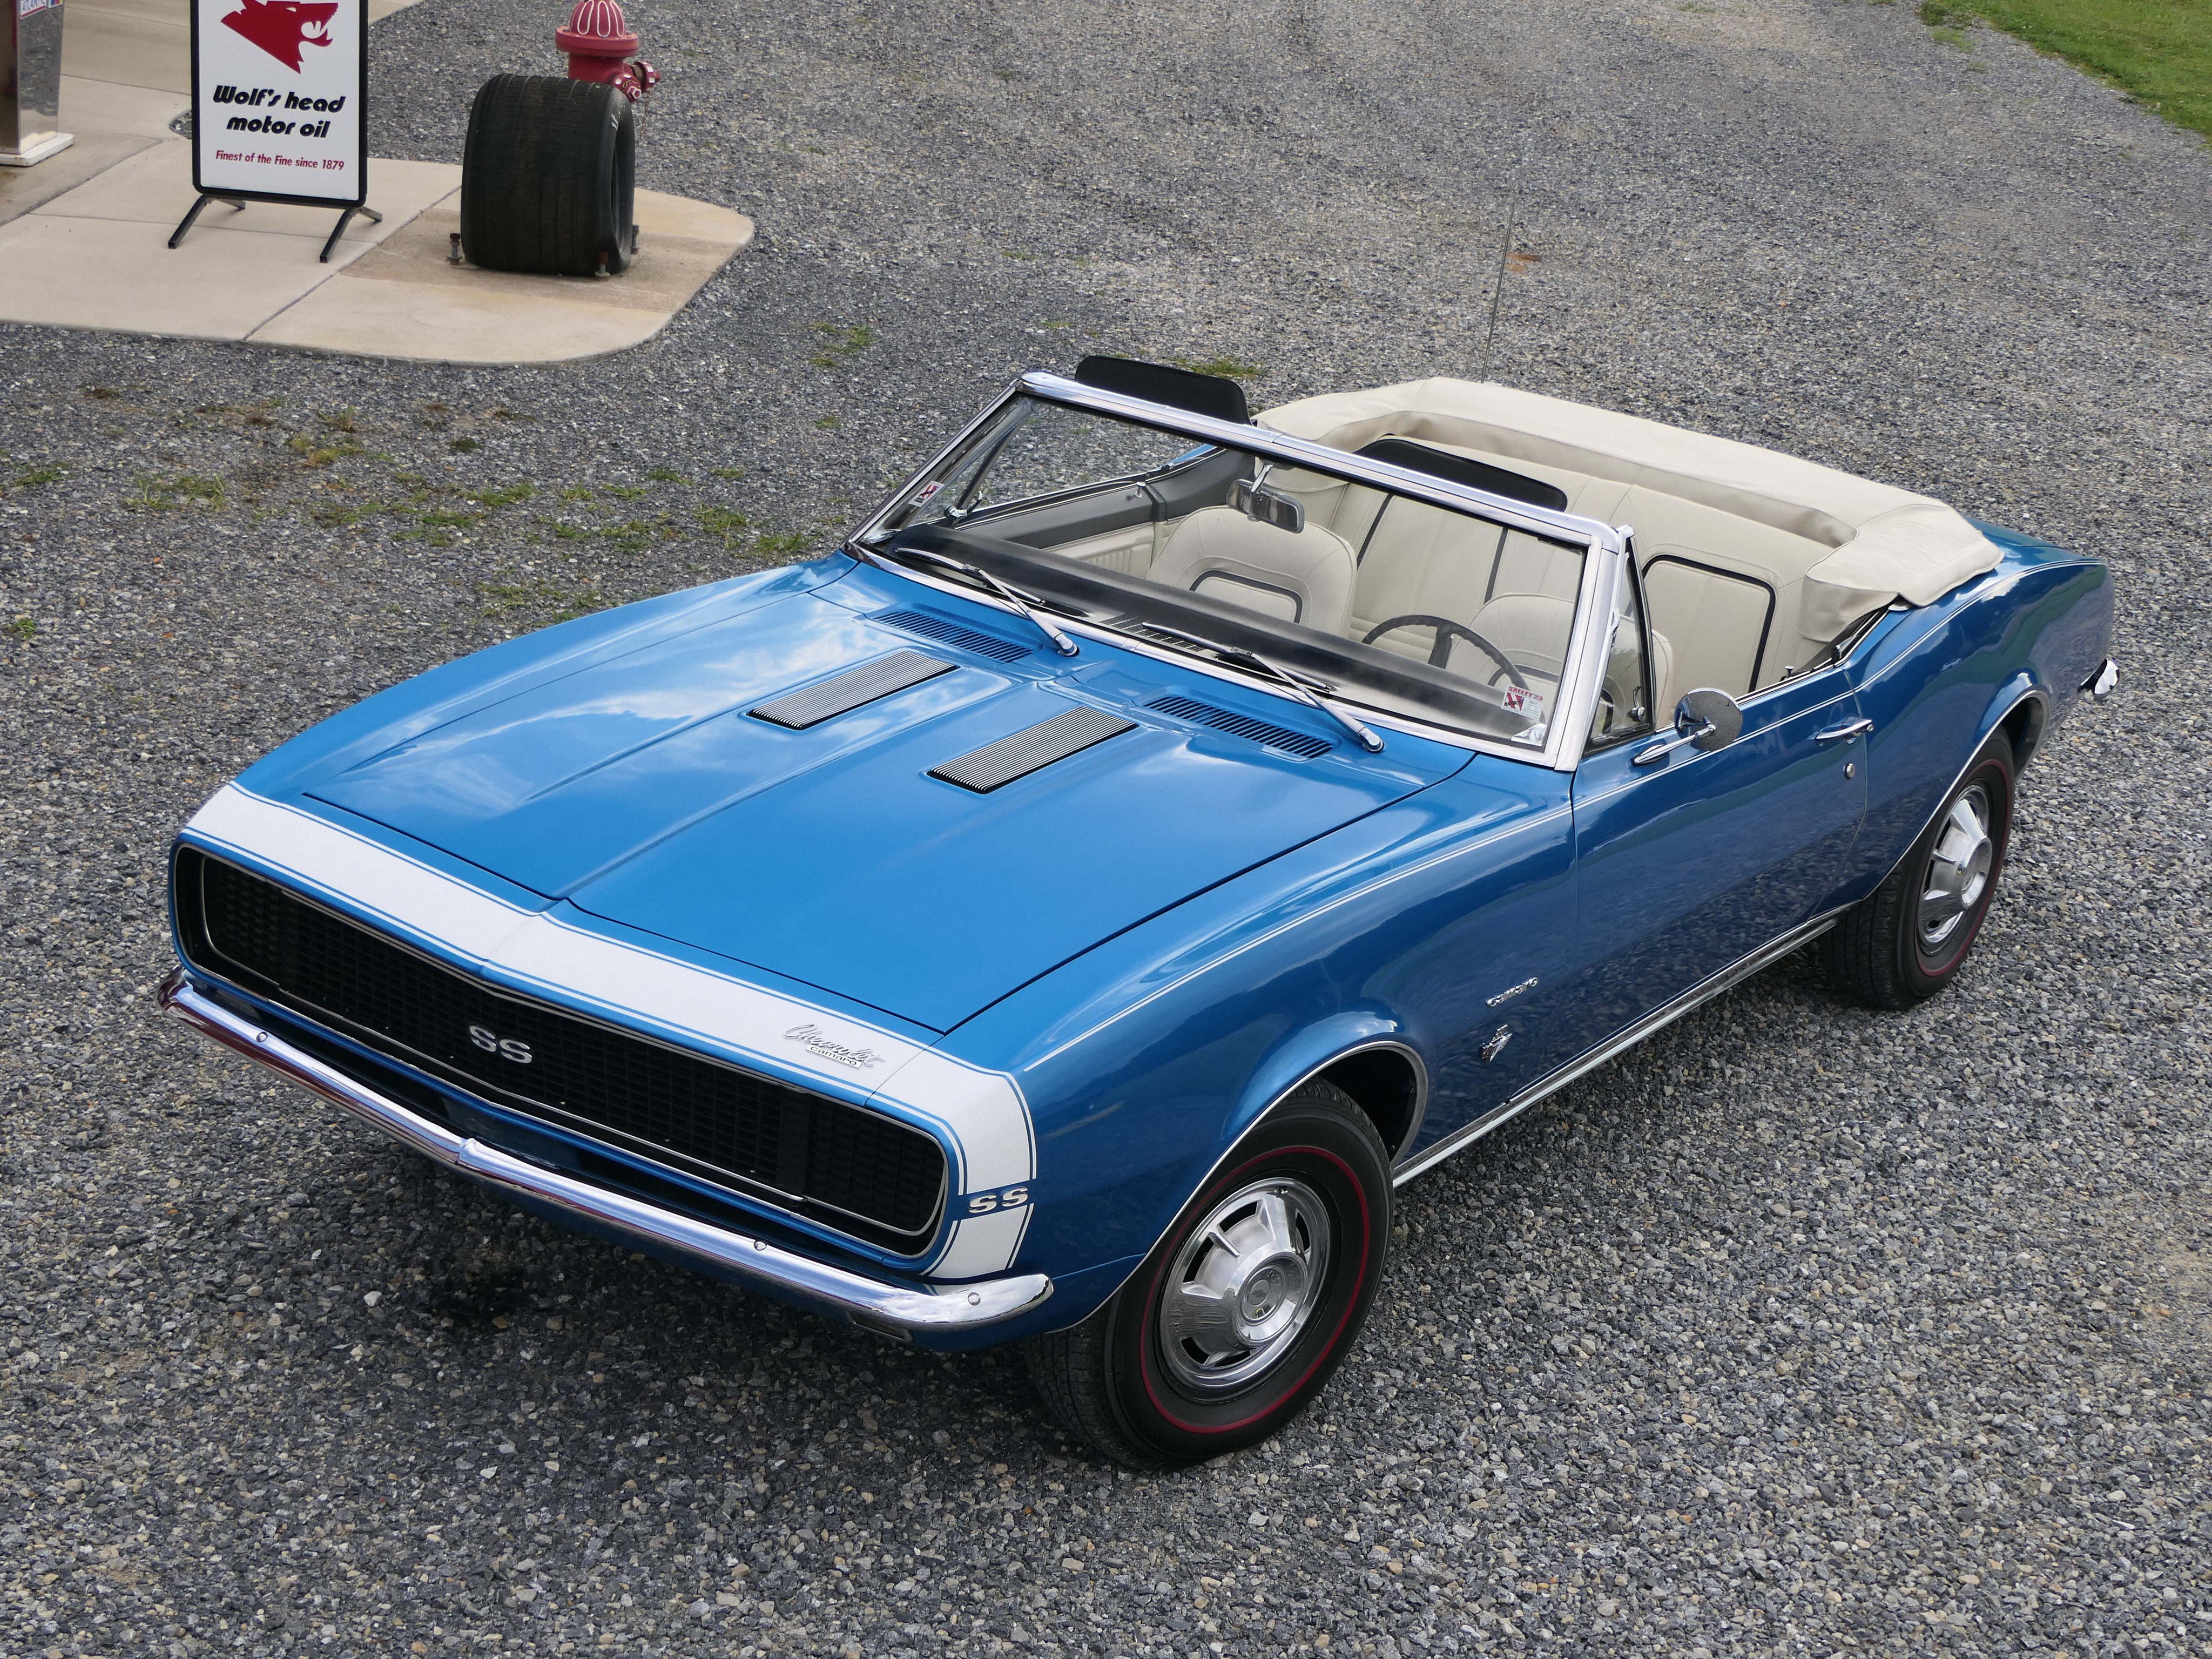 1967, 350, camaro, chevrolet, classic, convertible, muscle